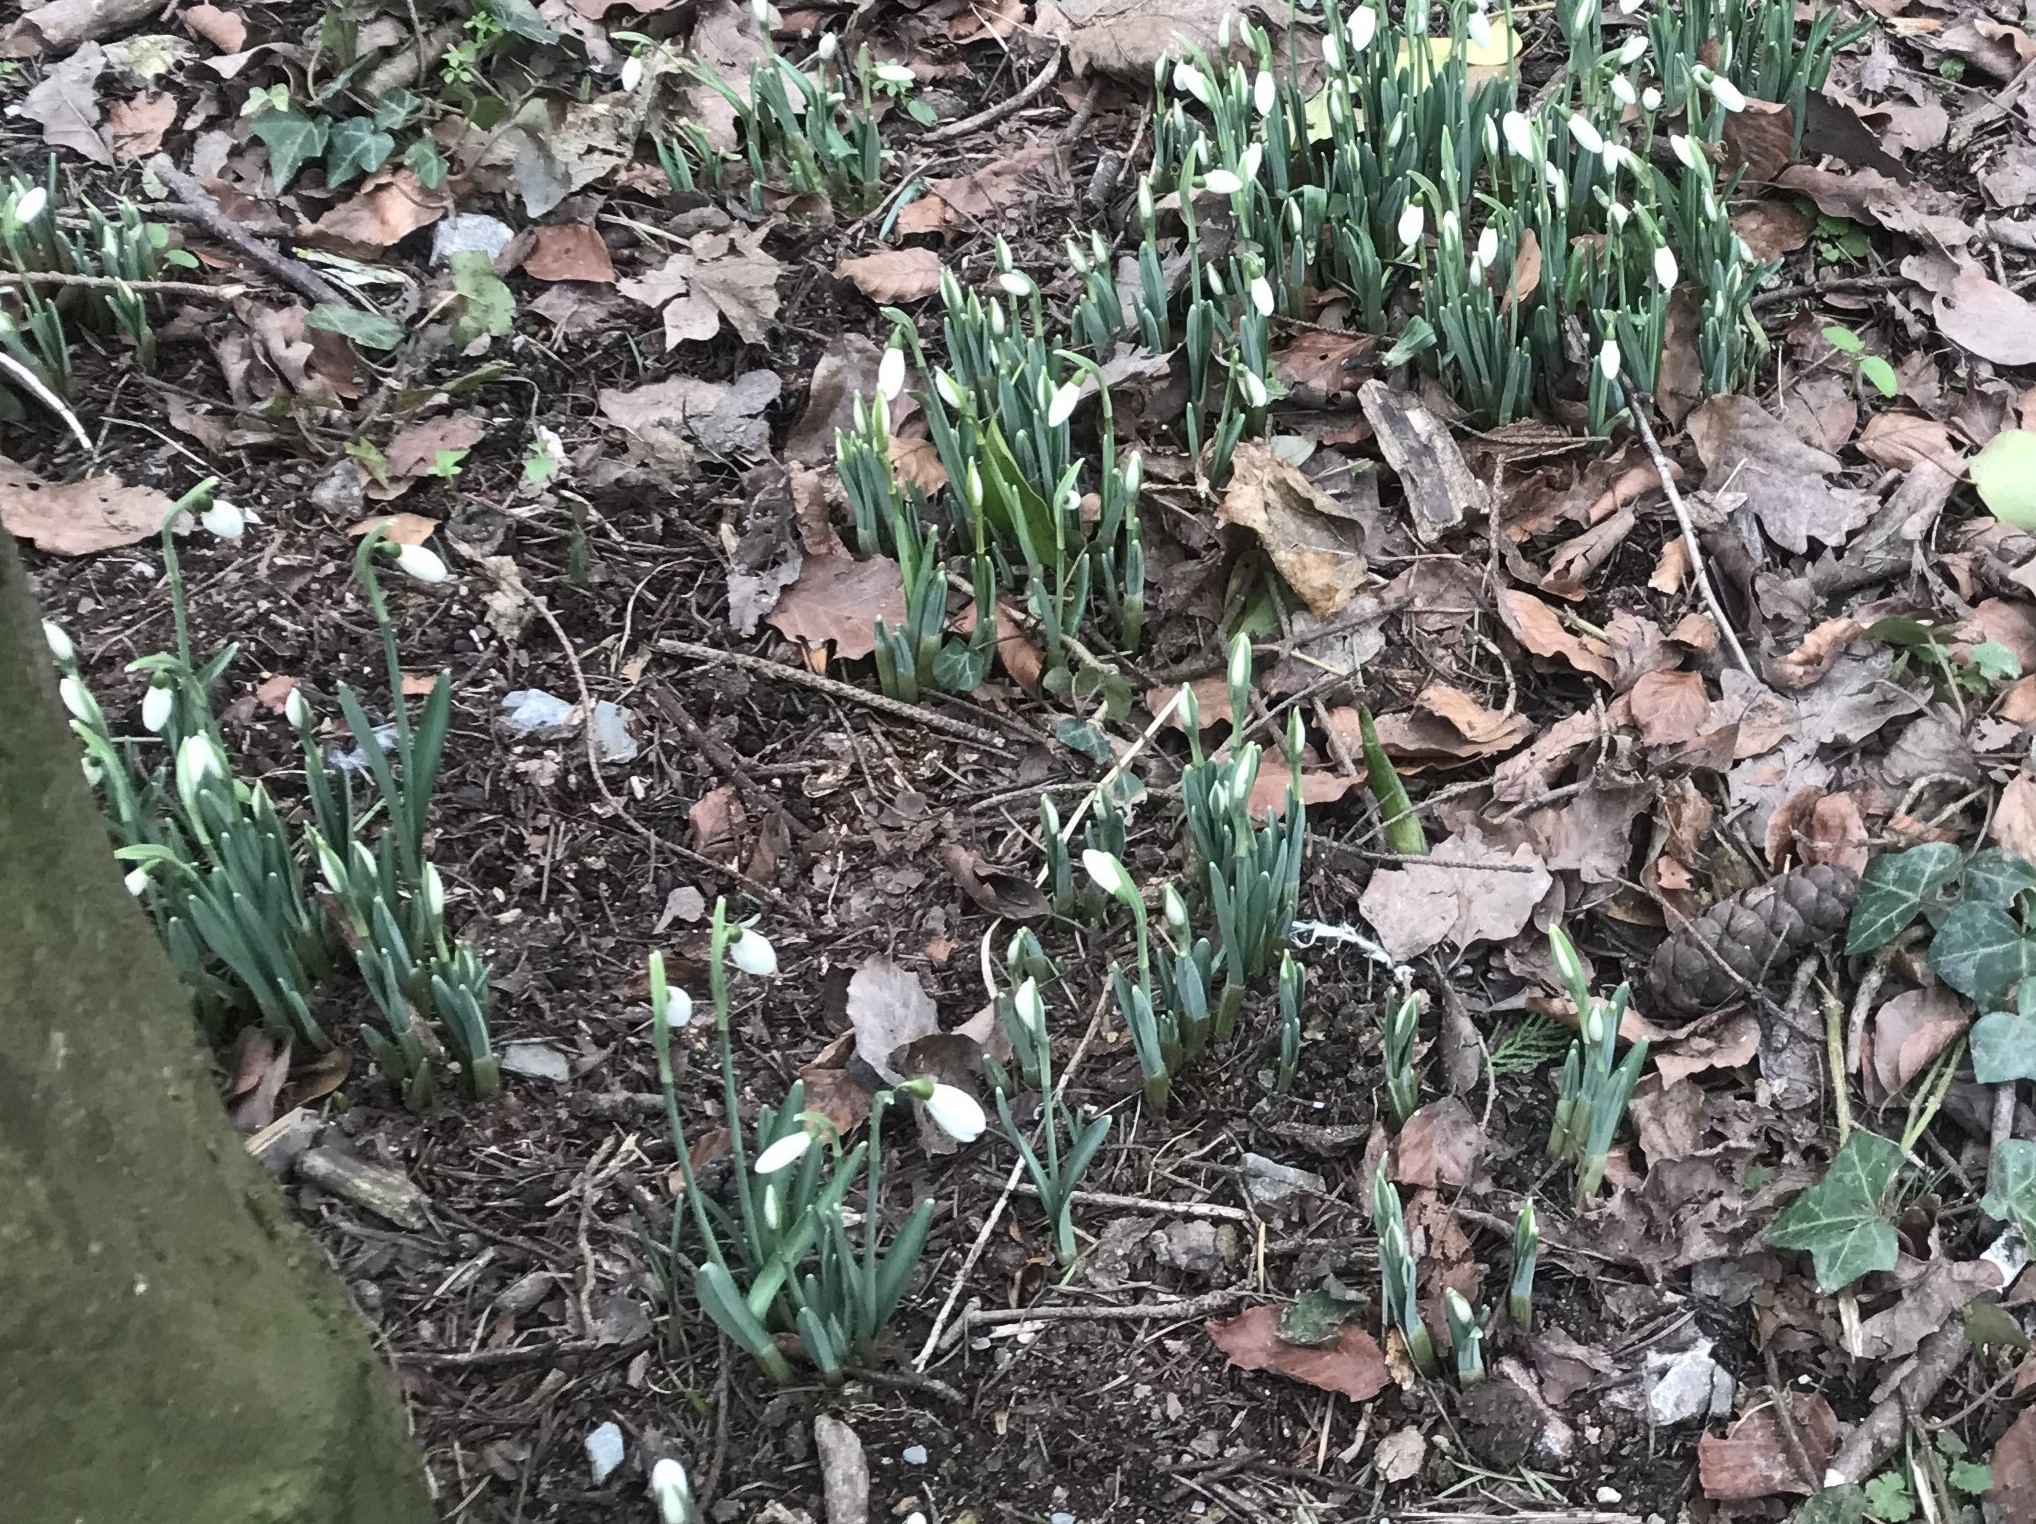 Snowdrops in January at Saltram